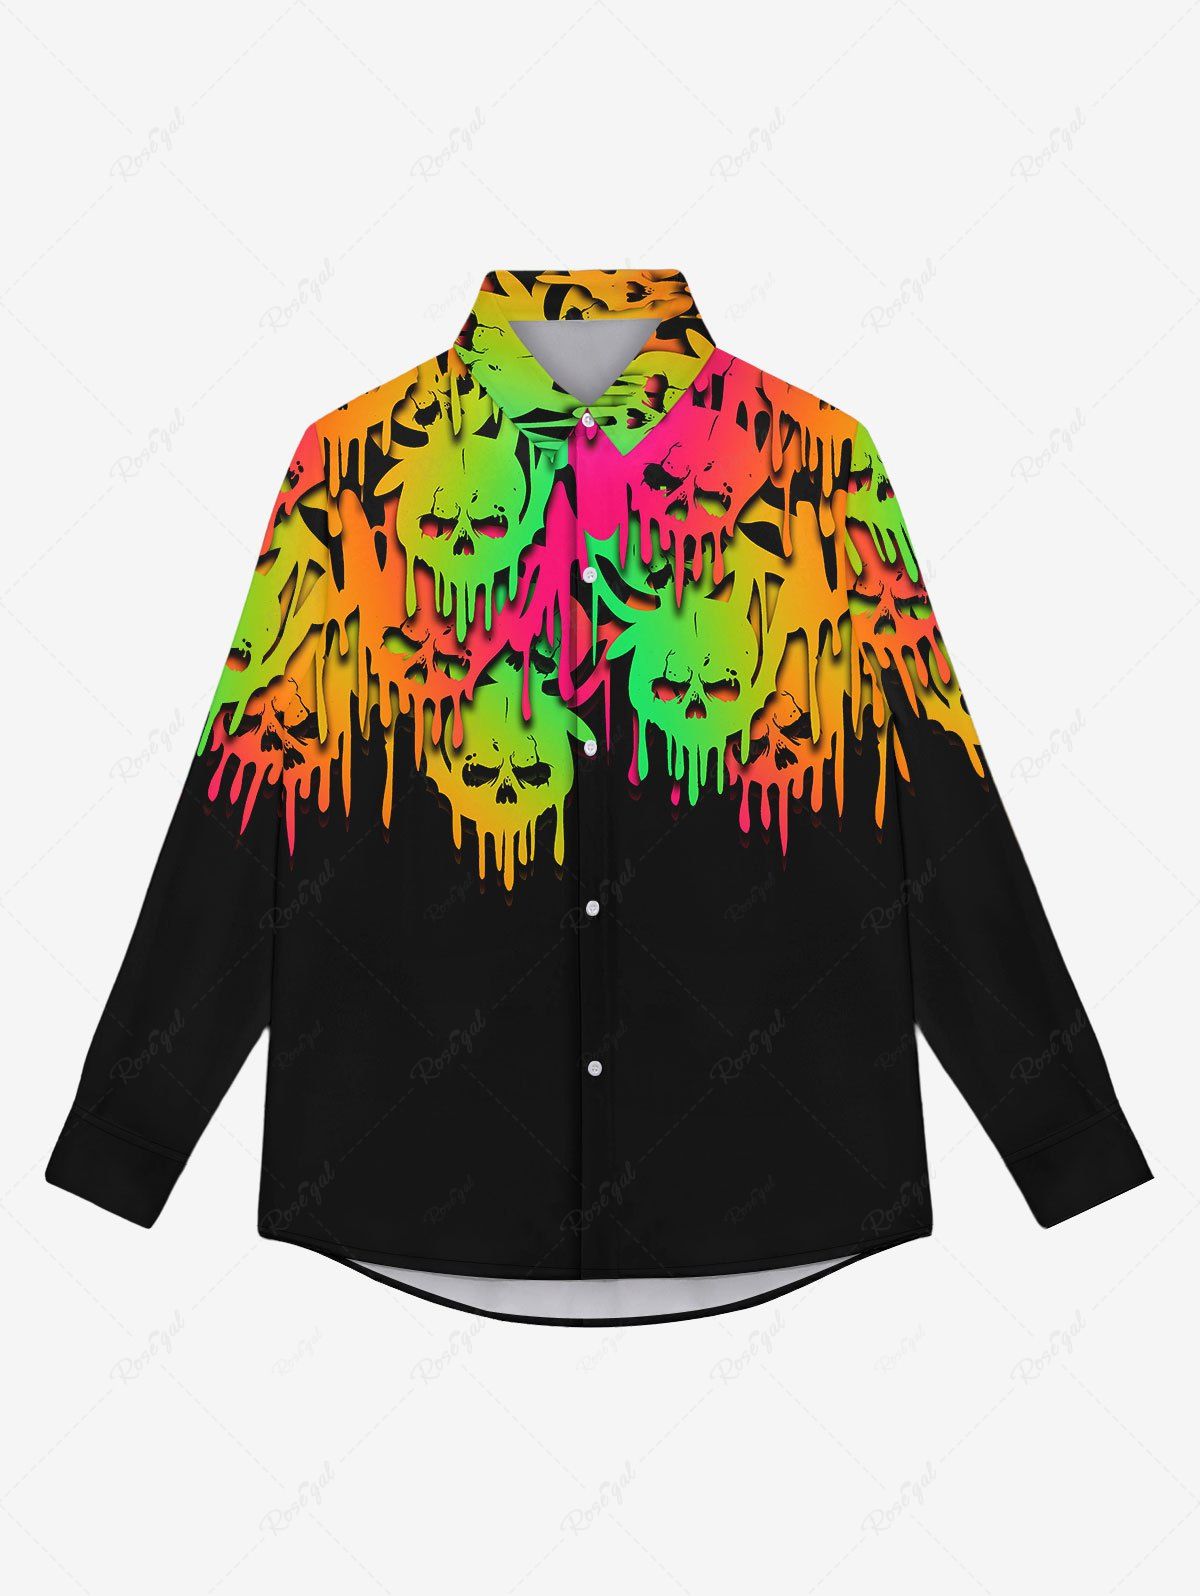 Fancy Gothic Turn-down Collar Ombre Paint Drop Skulls Print Full Buttons Shirt For Men  